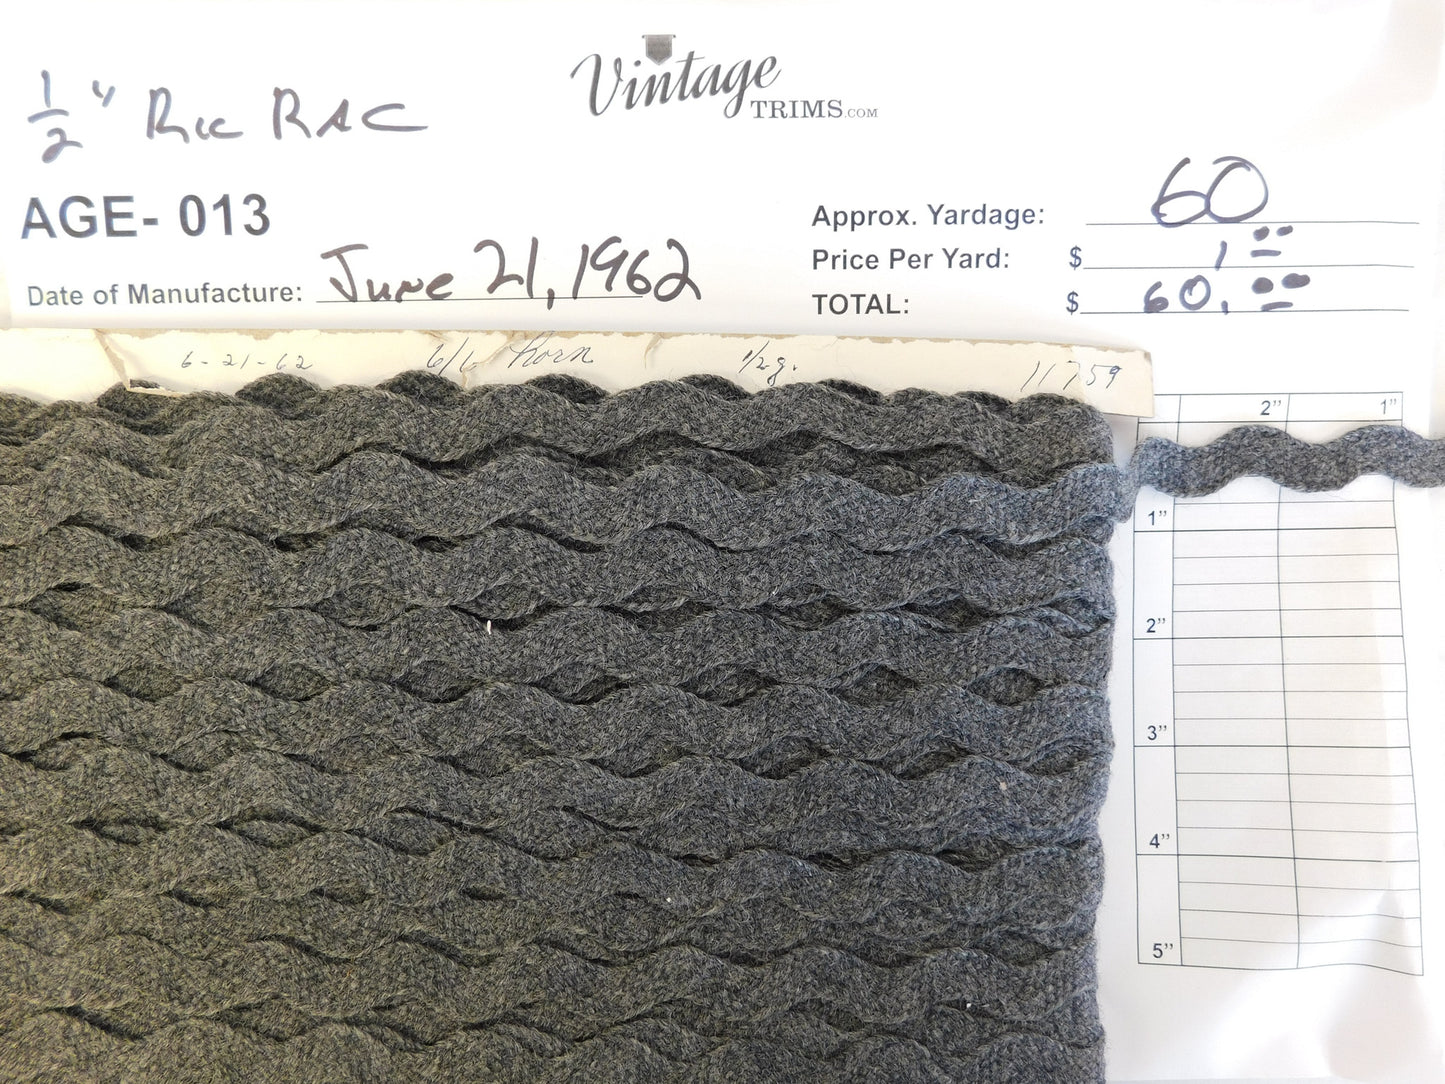 Card of 1/2" Gray Ric Rac (approx. 60 yards)